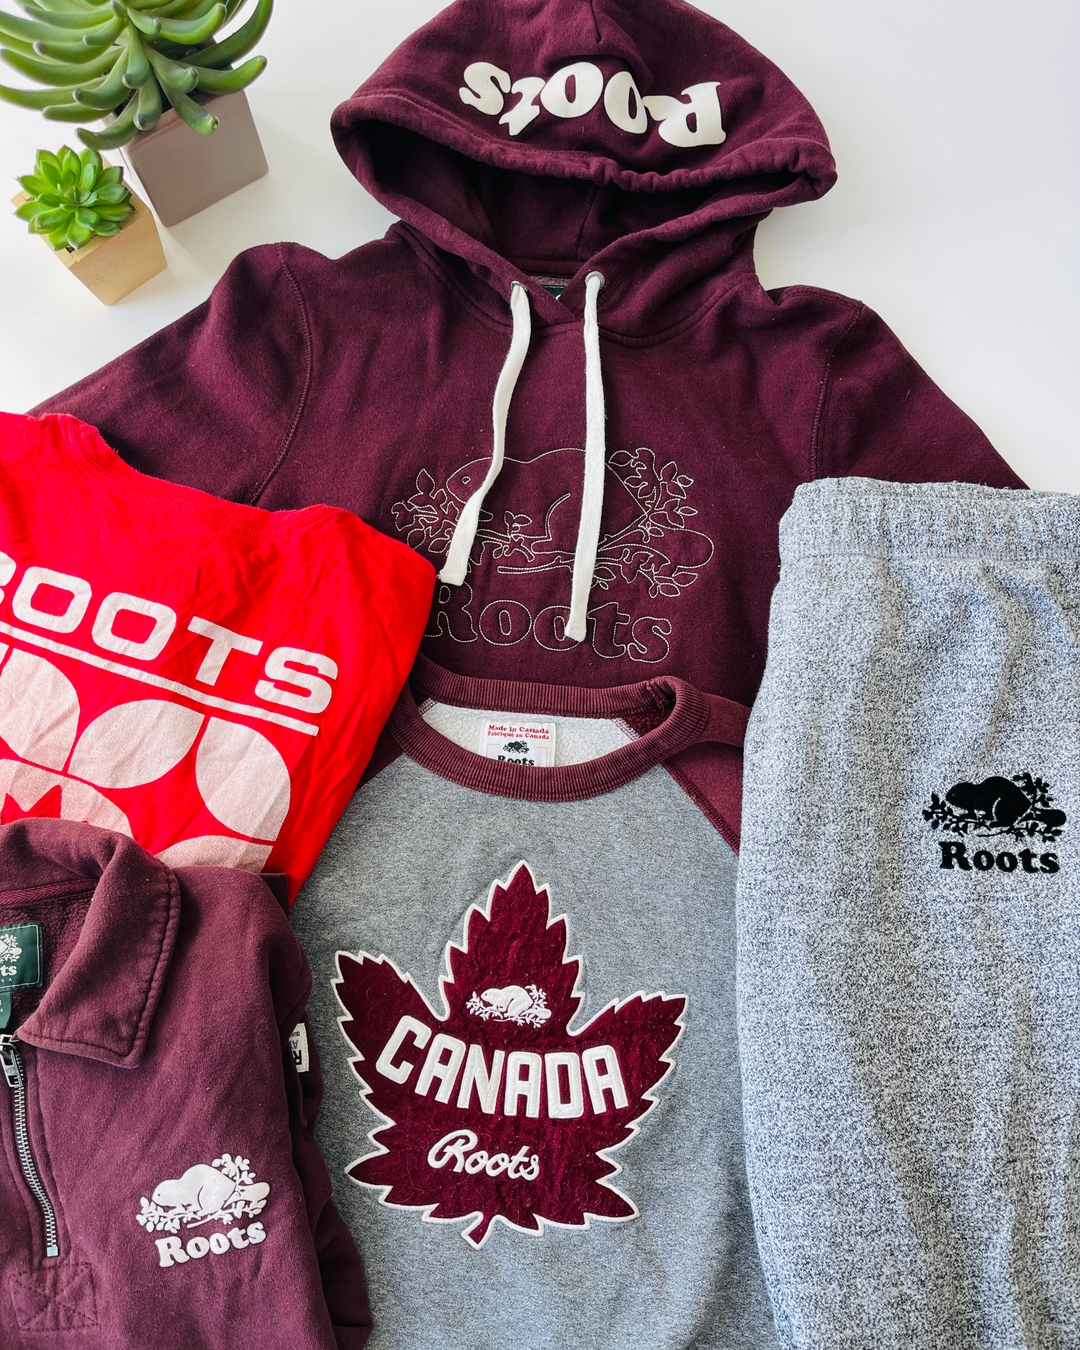 Roots brand sweatshirts and sweatpants laid out, main colours are red and grey.